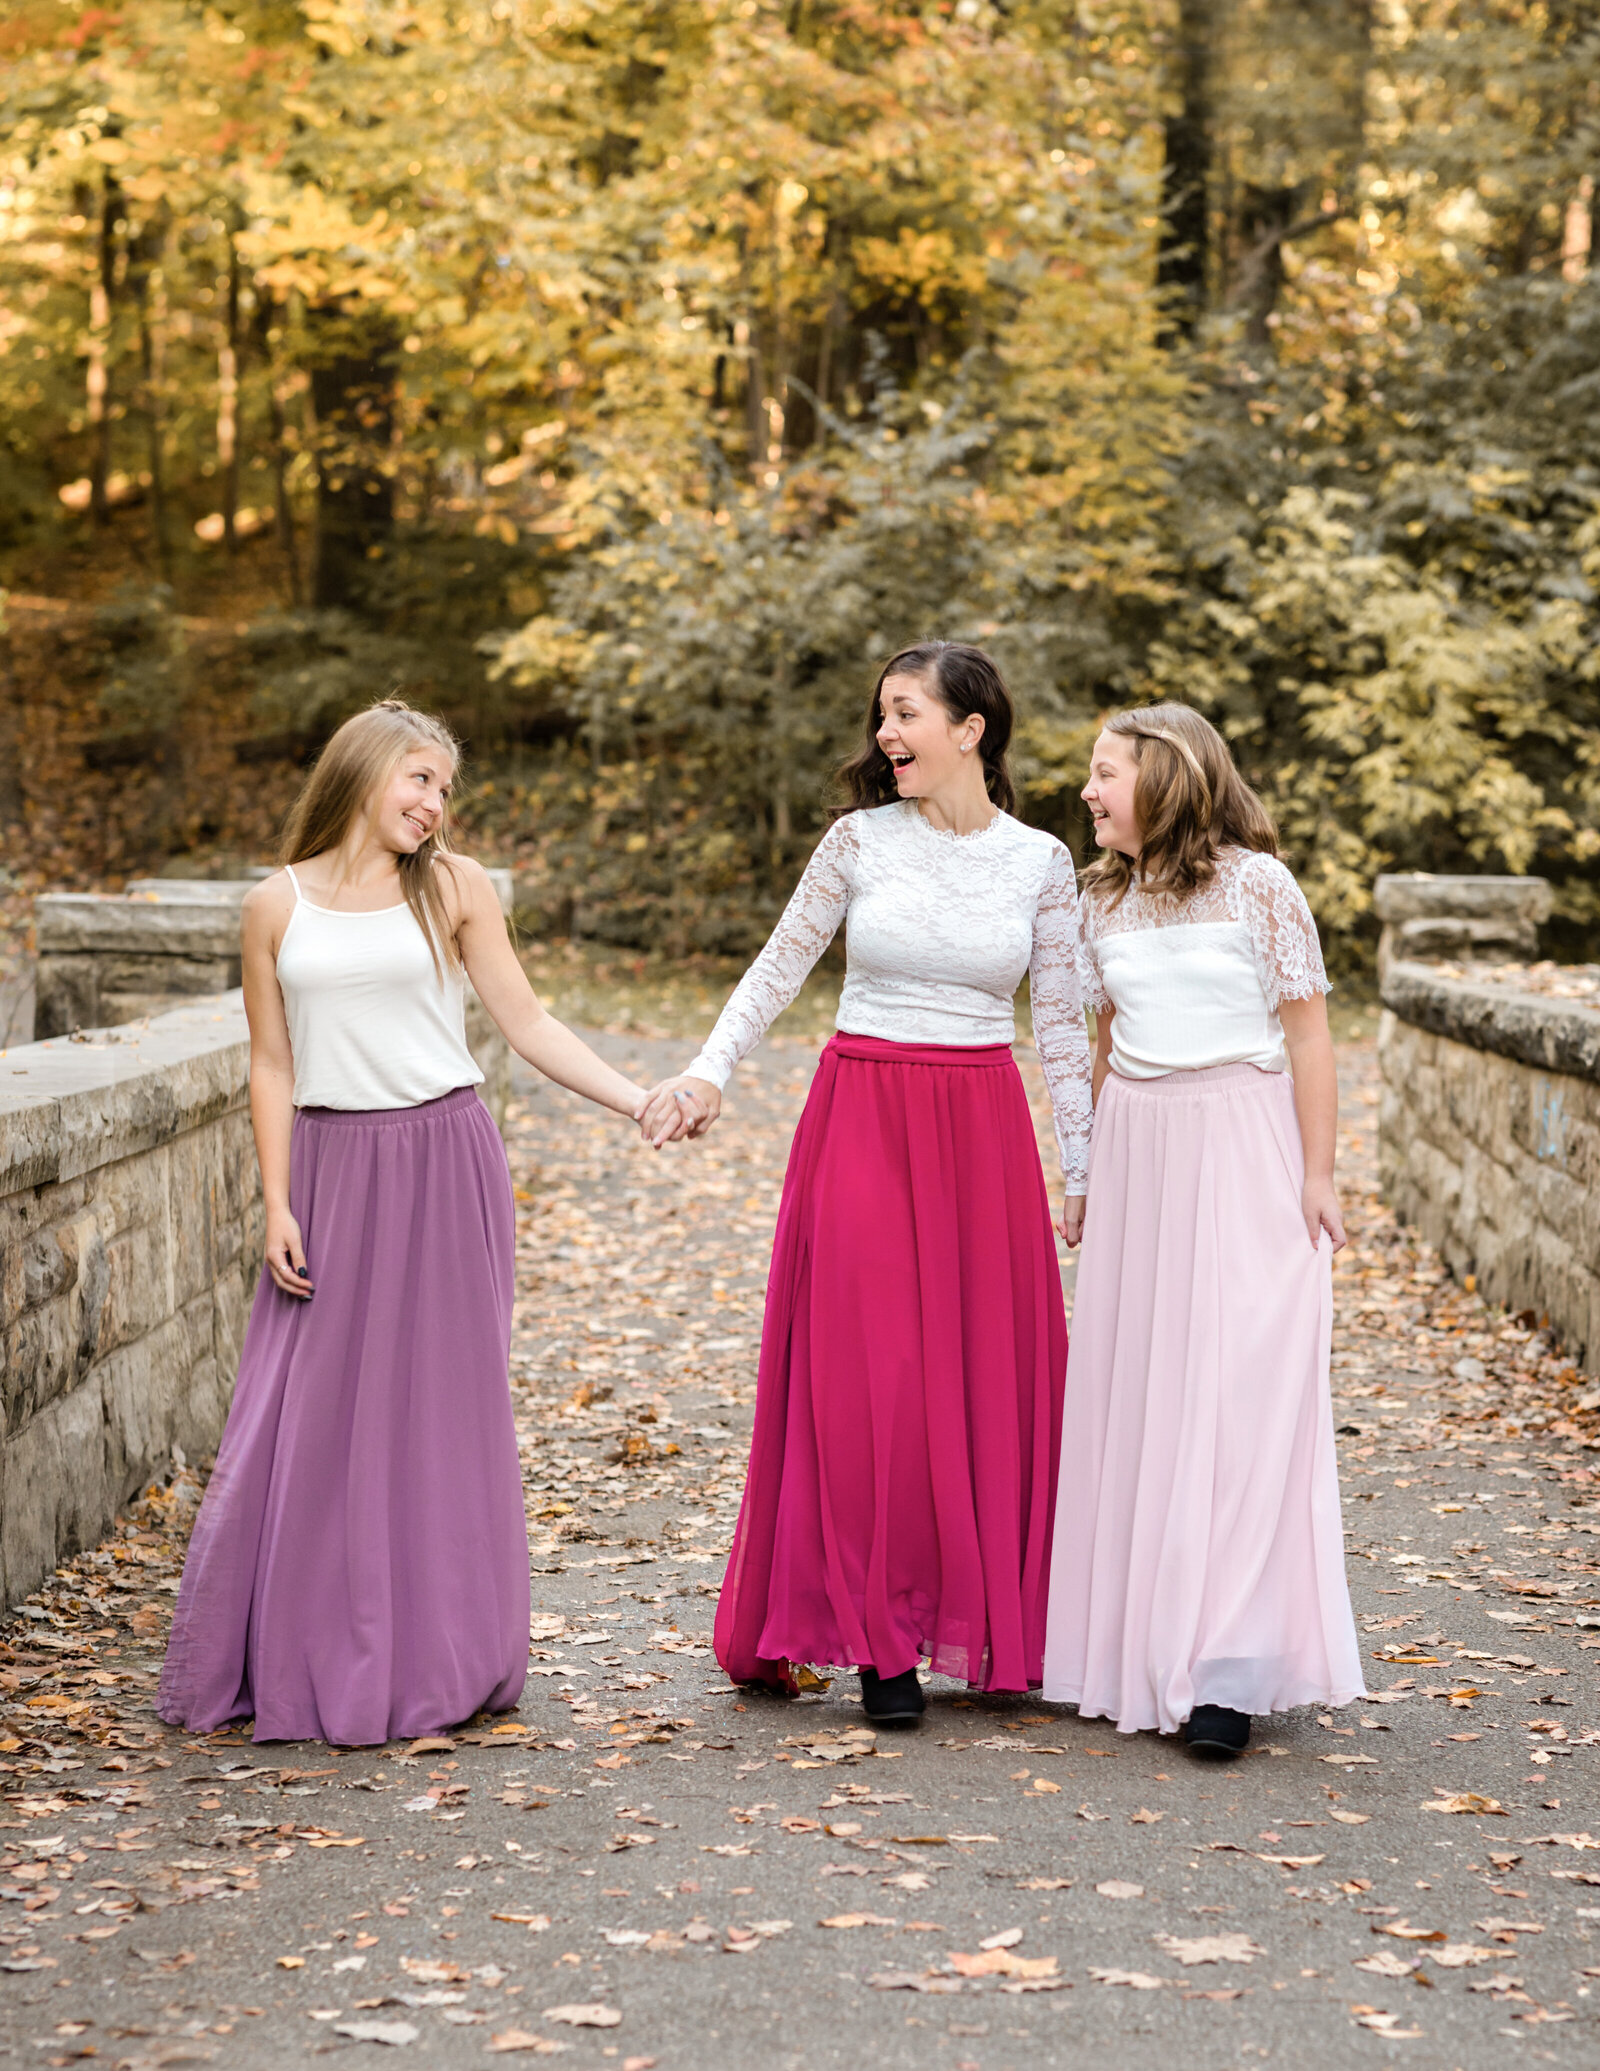 mom and two daughters walking and laughing at park for family photos